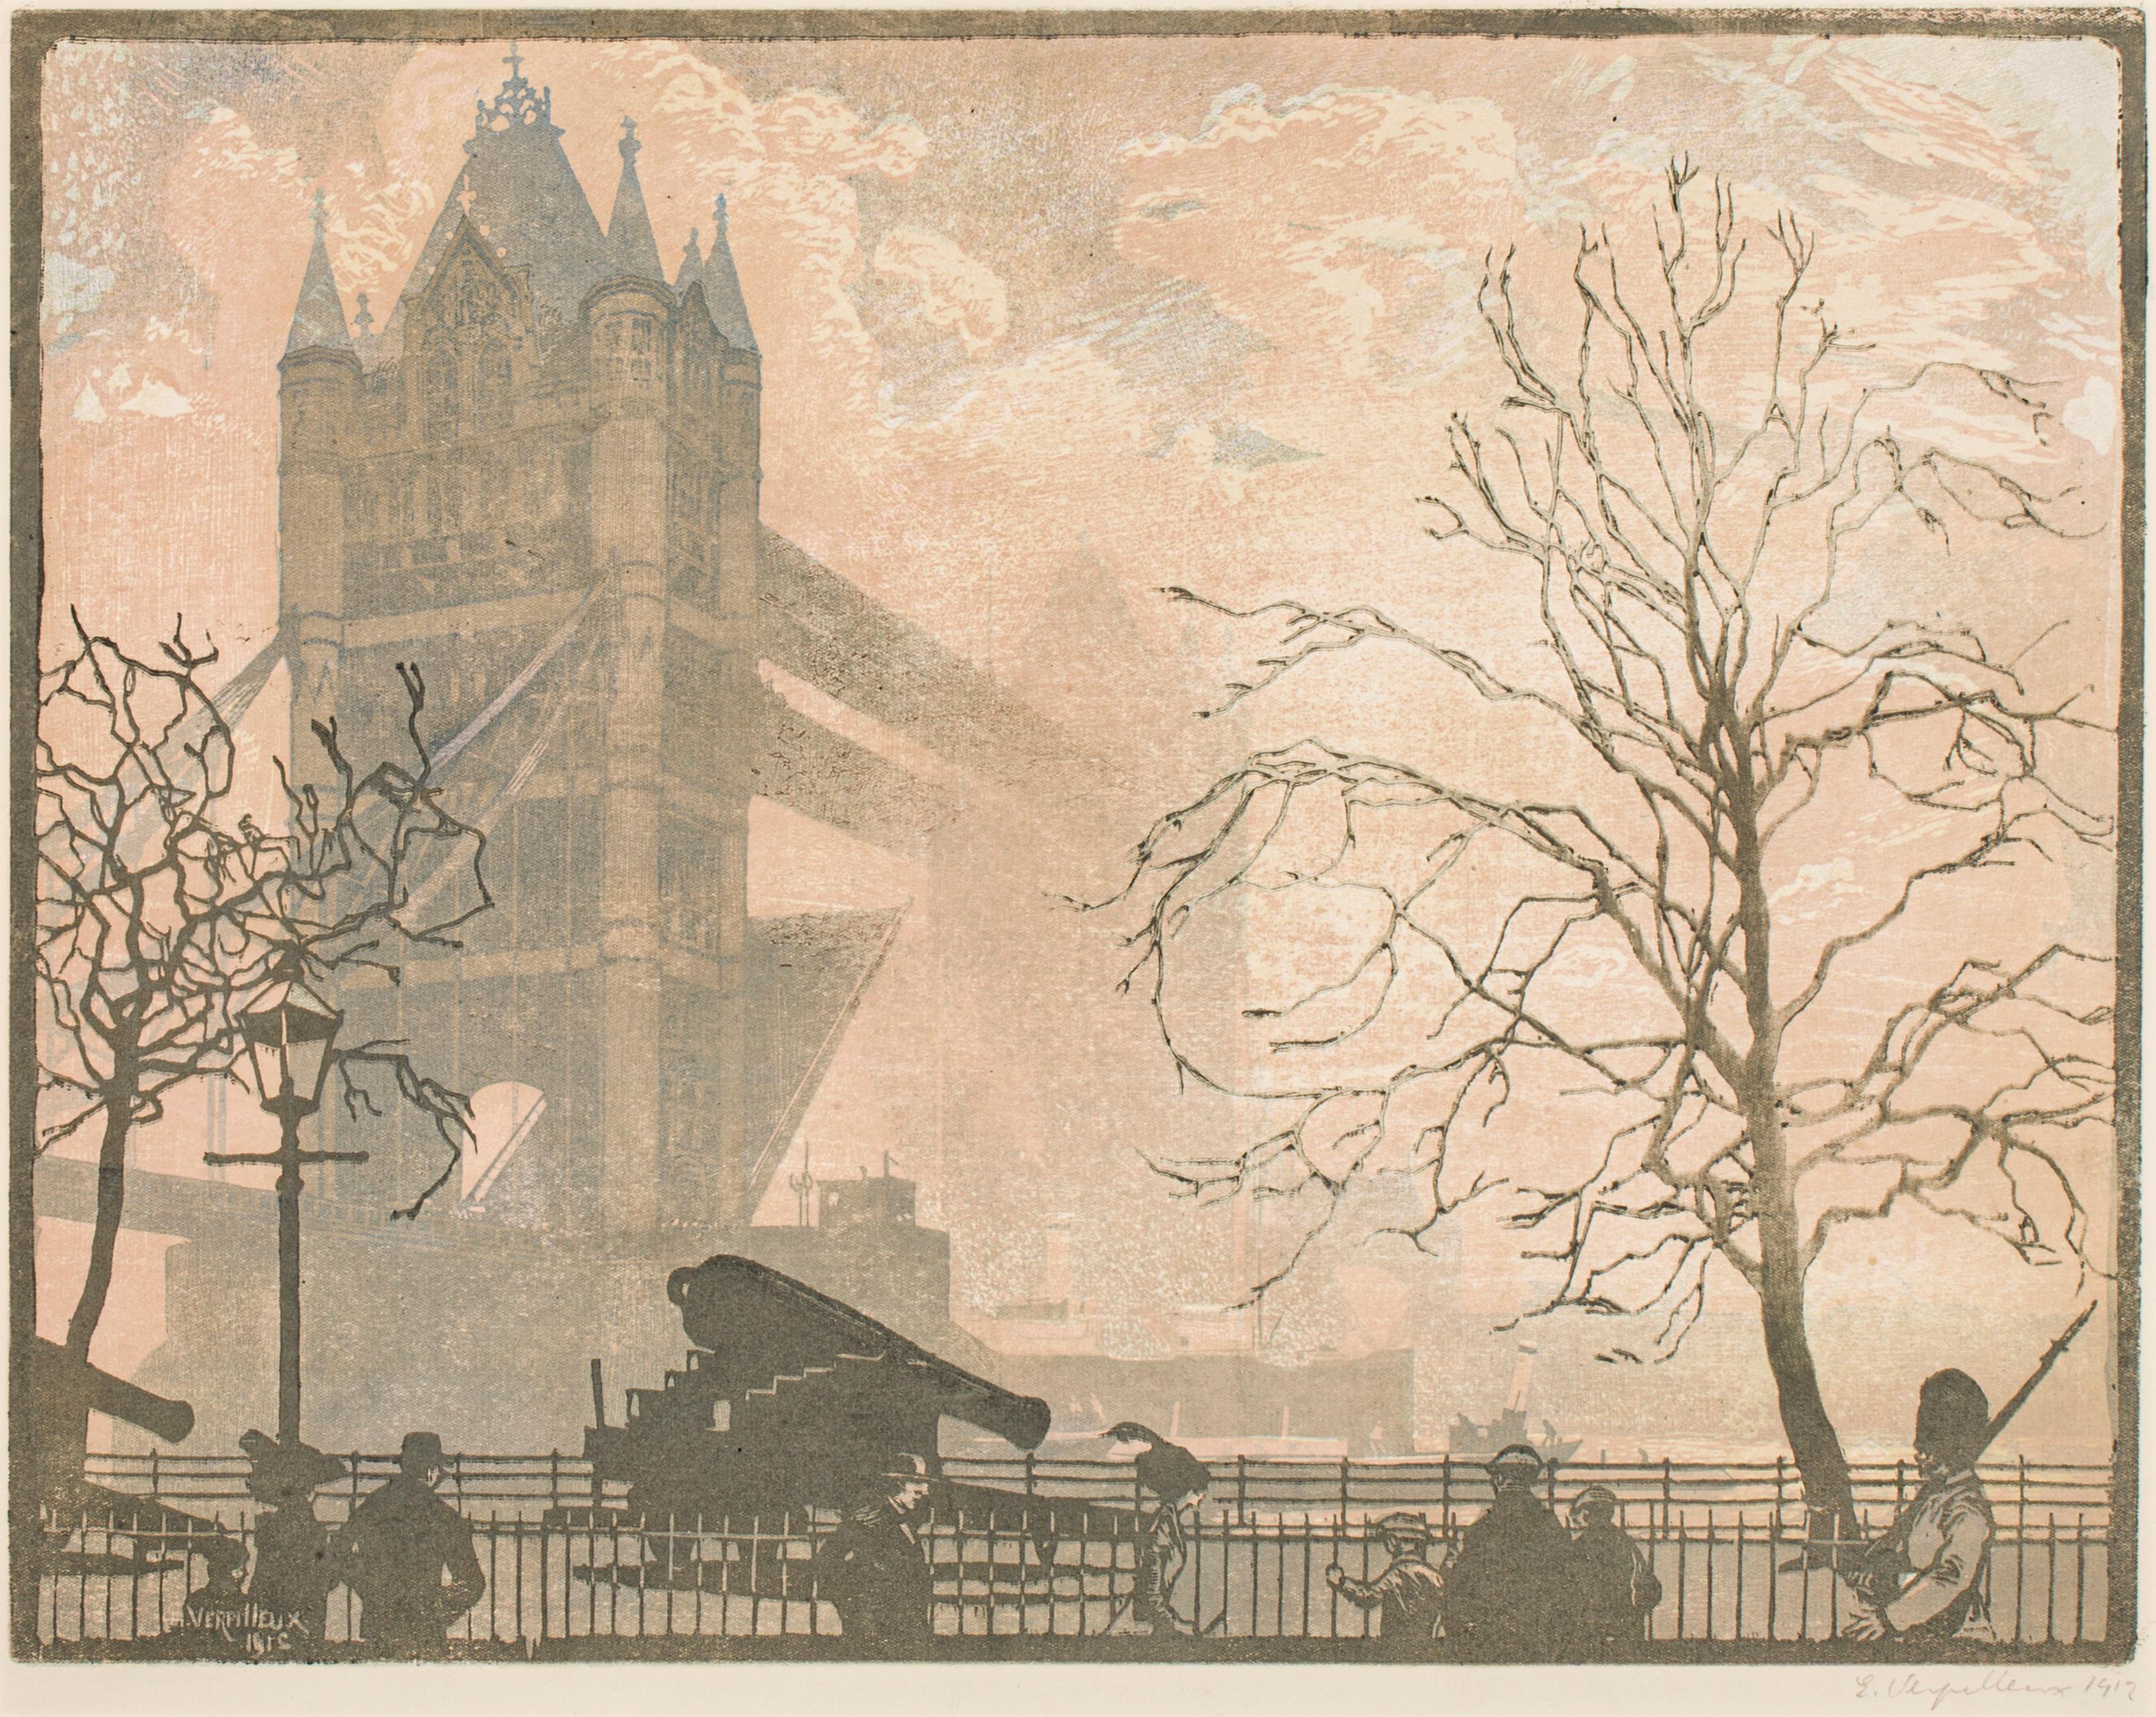 Emile Antoine Verpilleux, 1888-1964
The Tower Bridge, 1912
Original woodcut, printed in colors
14 x 17 3/4 inches
signed and dated in pencil